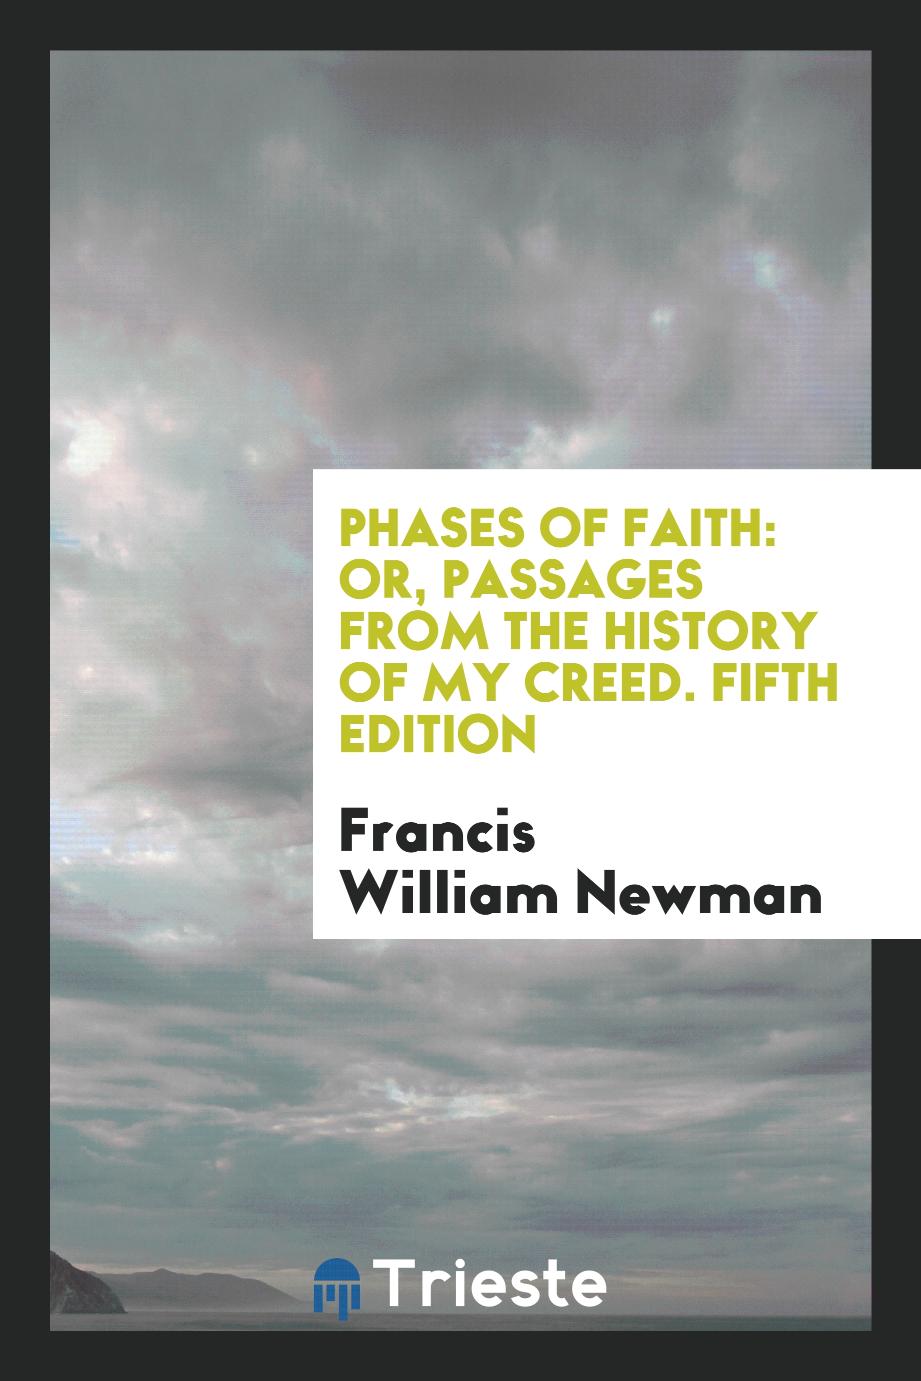 Phases of Faith: Or, Passages from the History of My Creed. Fifth Edition